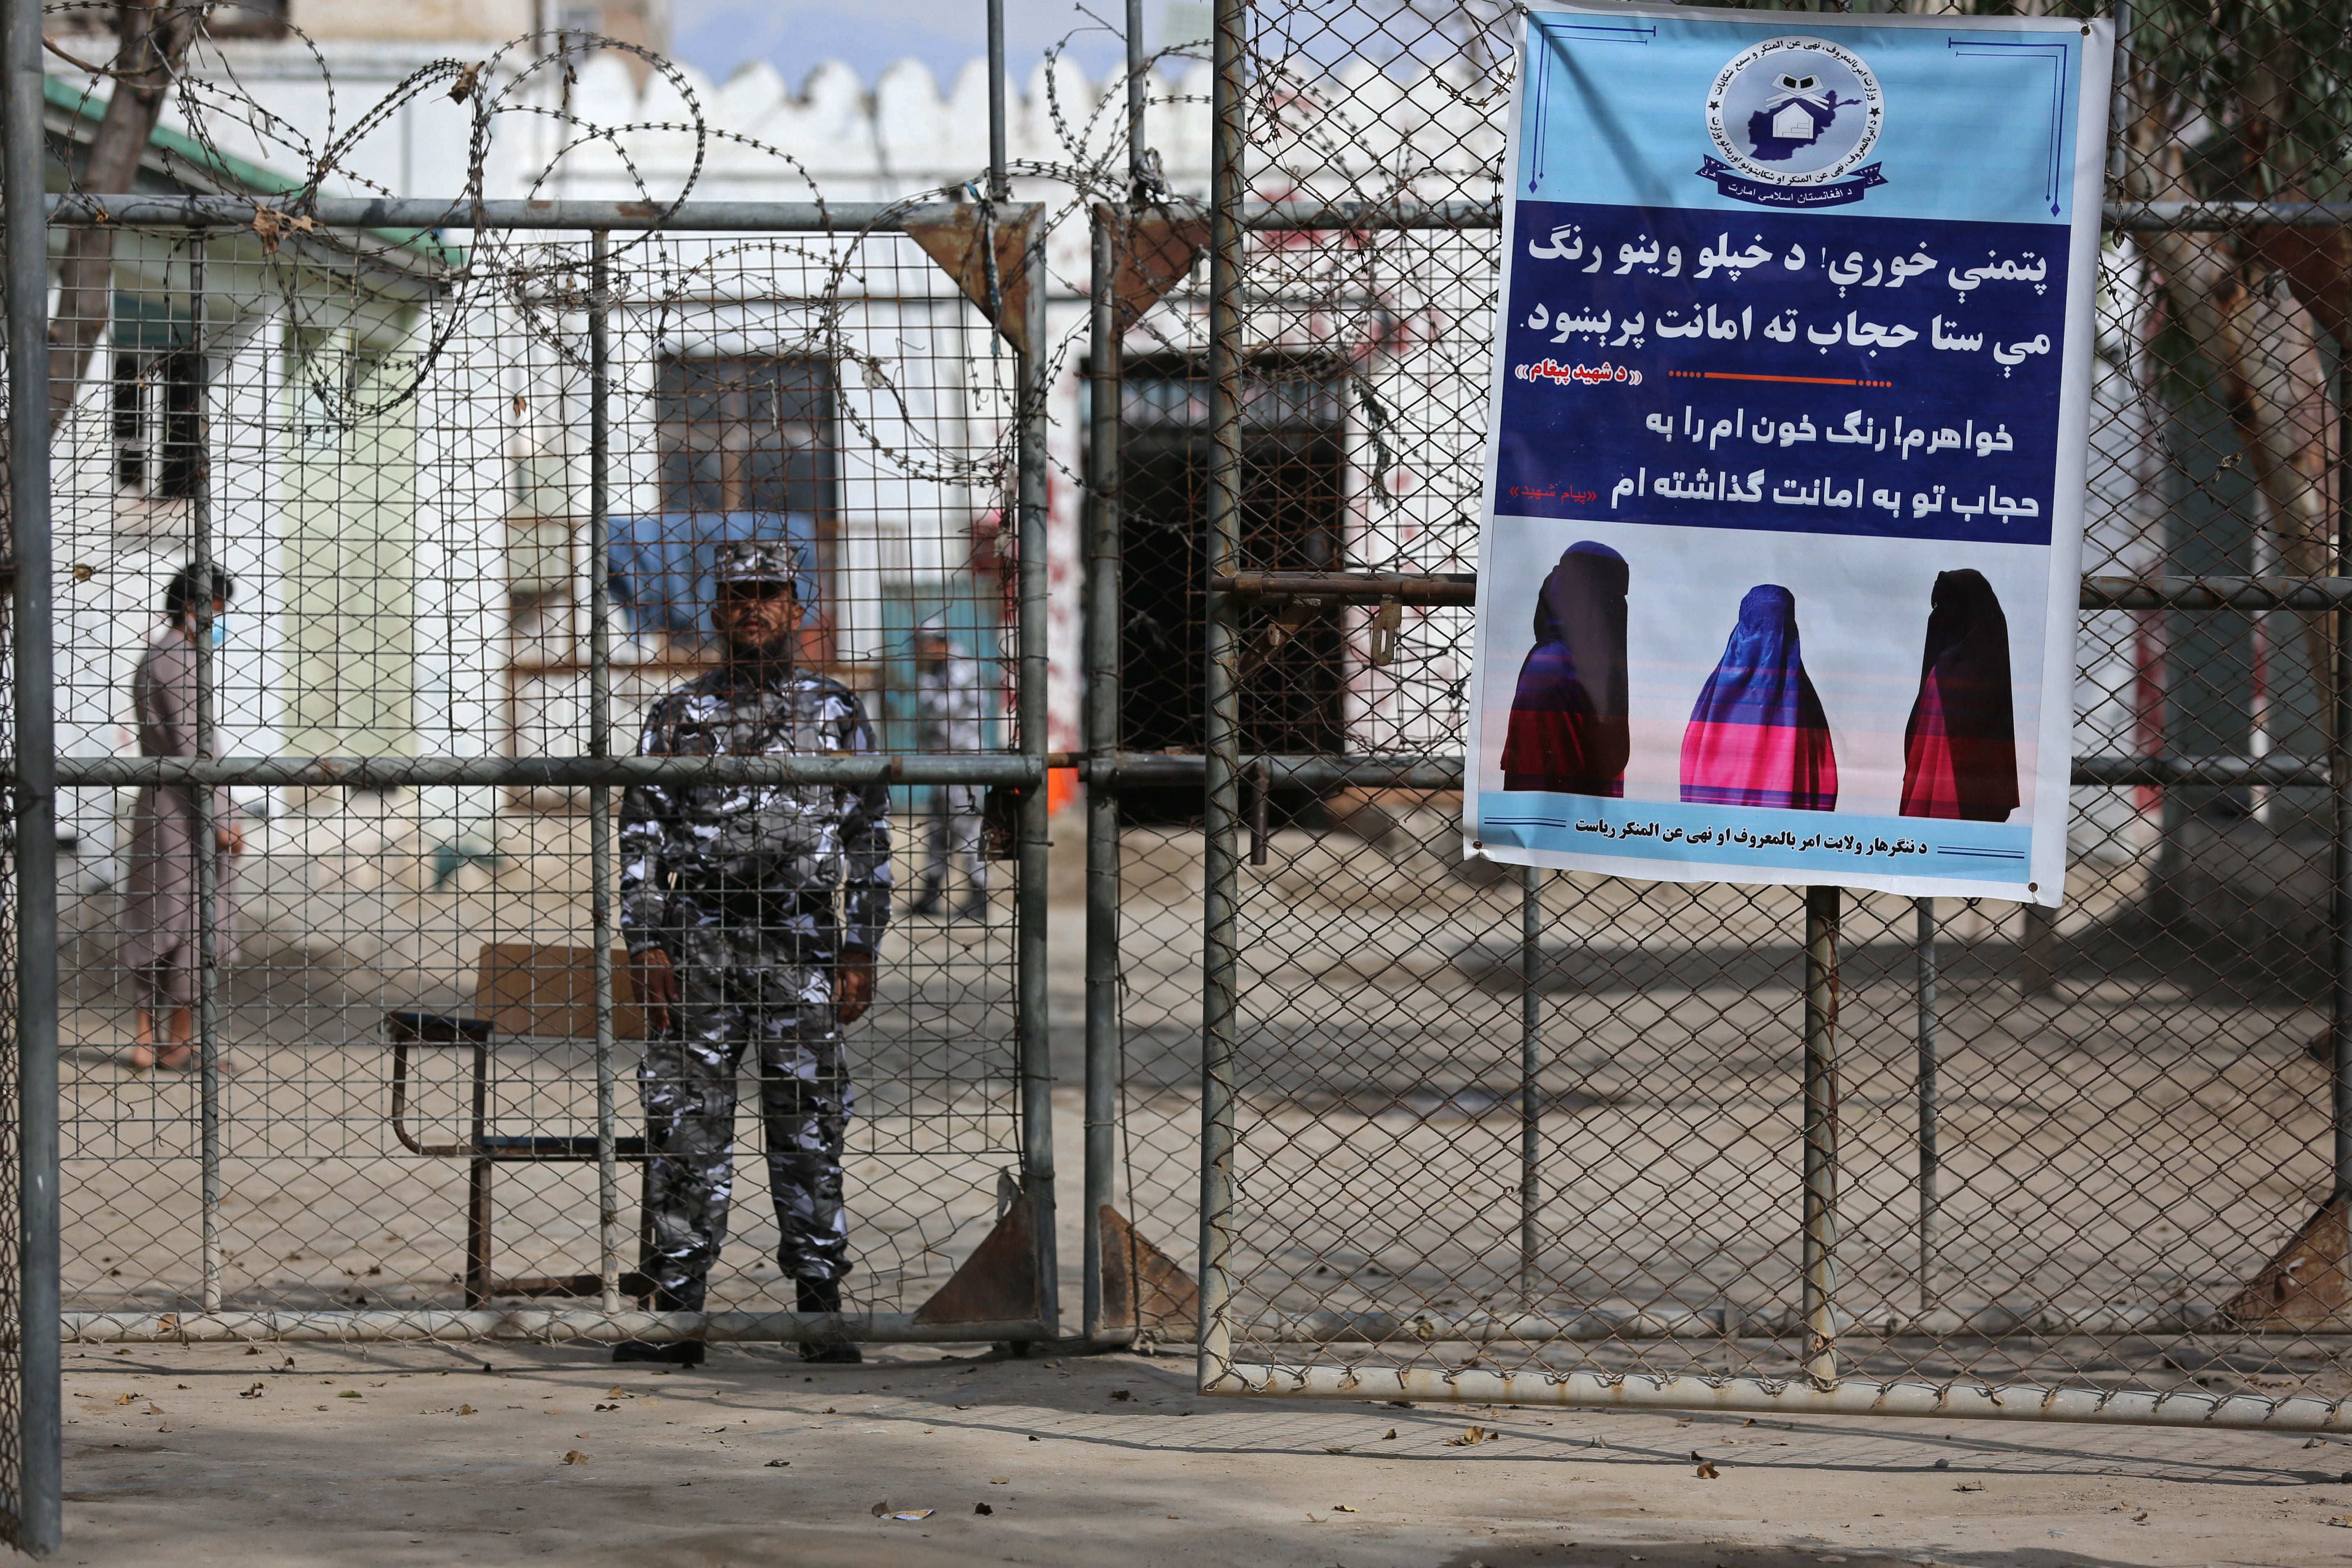 A Taliban security guard stands by a poster ordering women to wear Hijab, during a ceremony marking the distribution of new uniforms by the Taliban authorities at a prison in Jalalabad